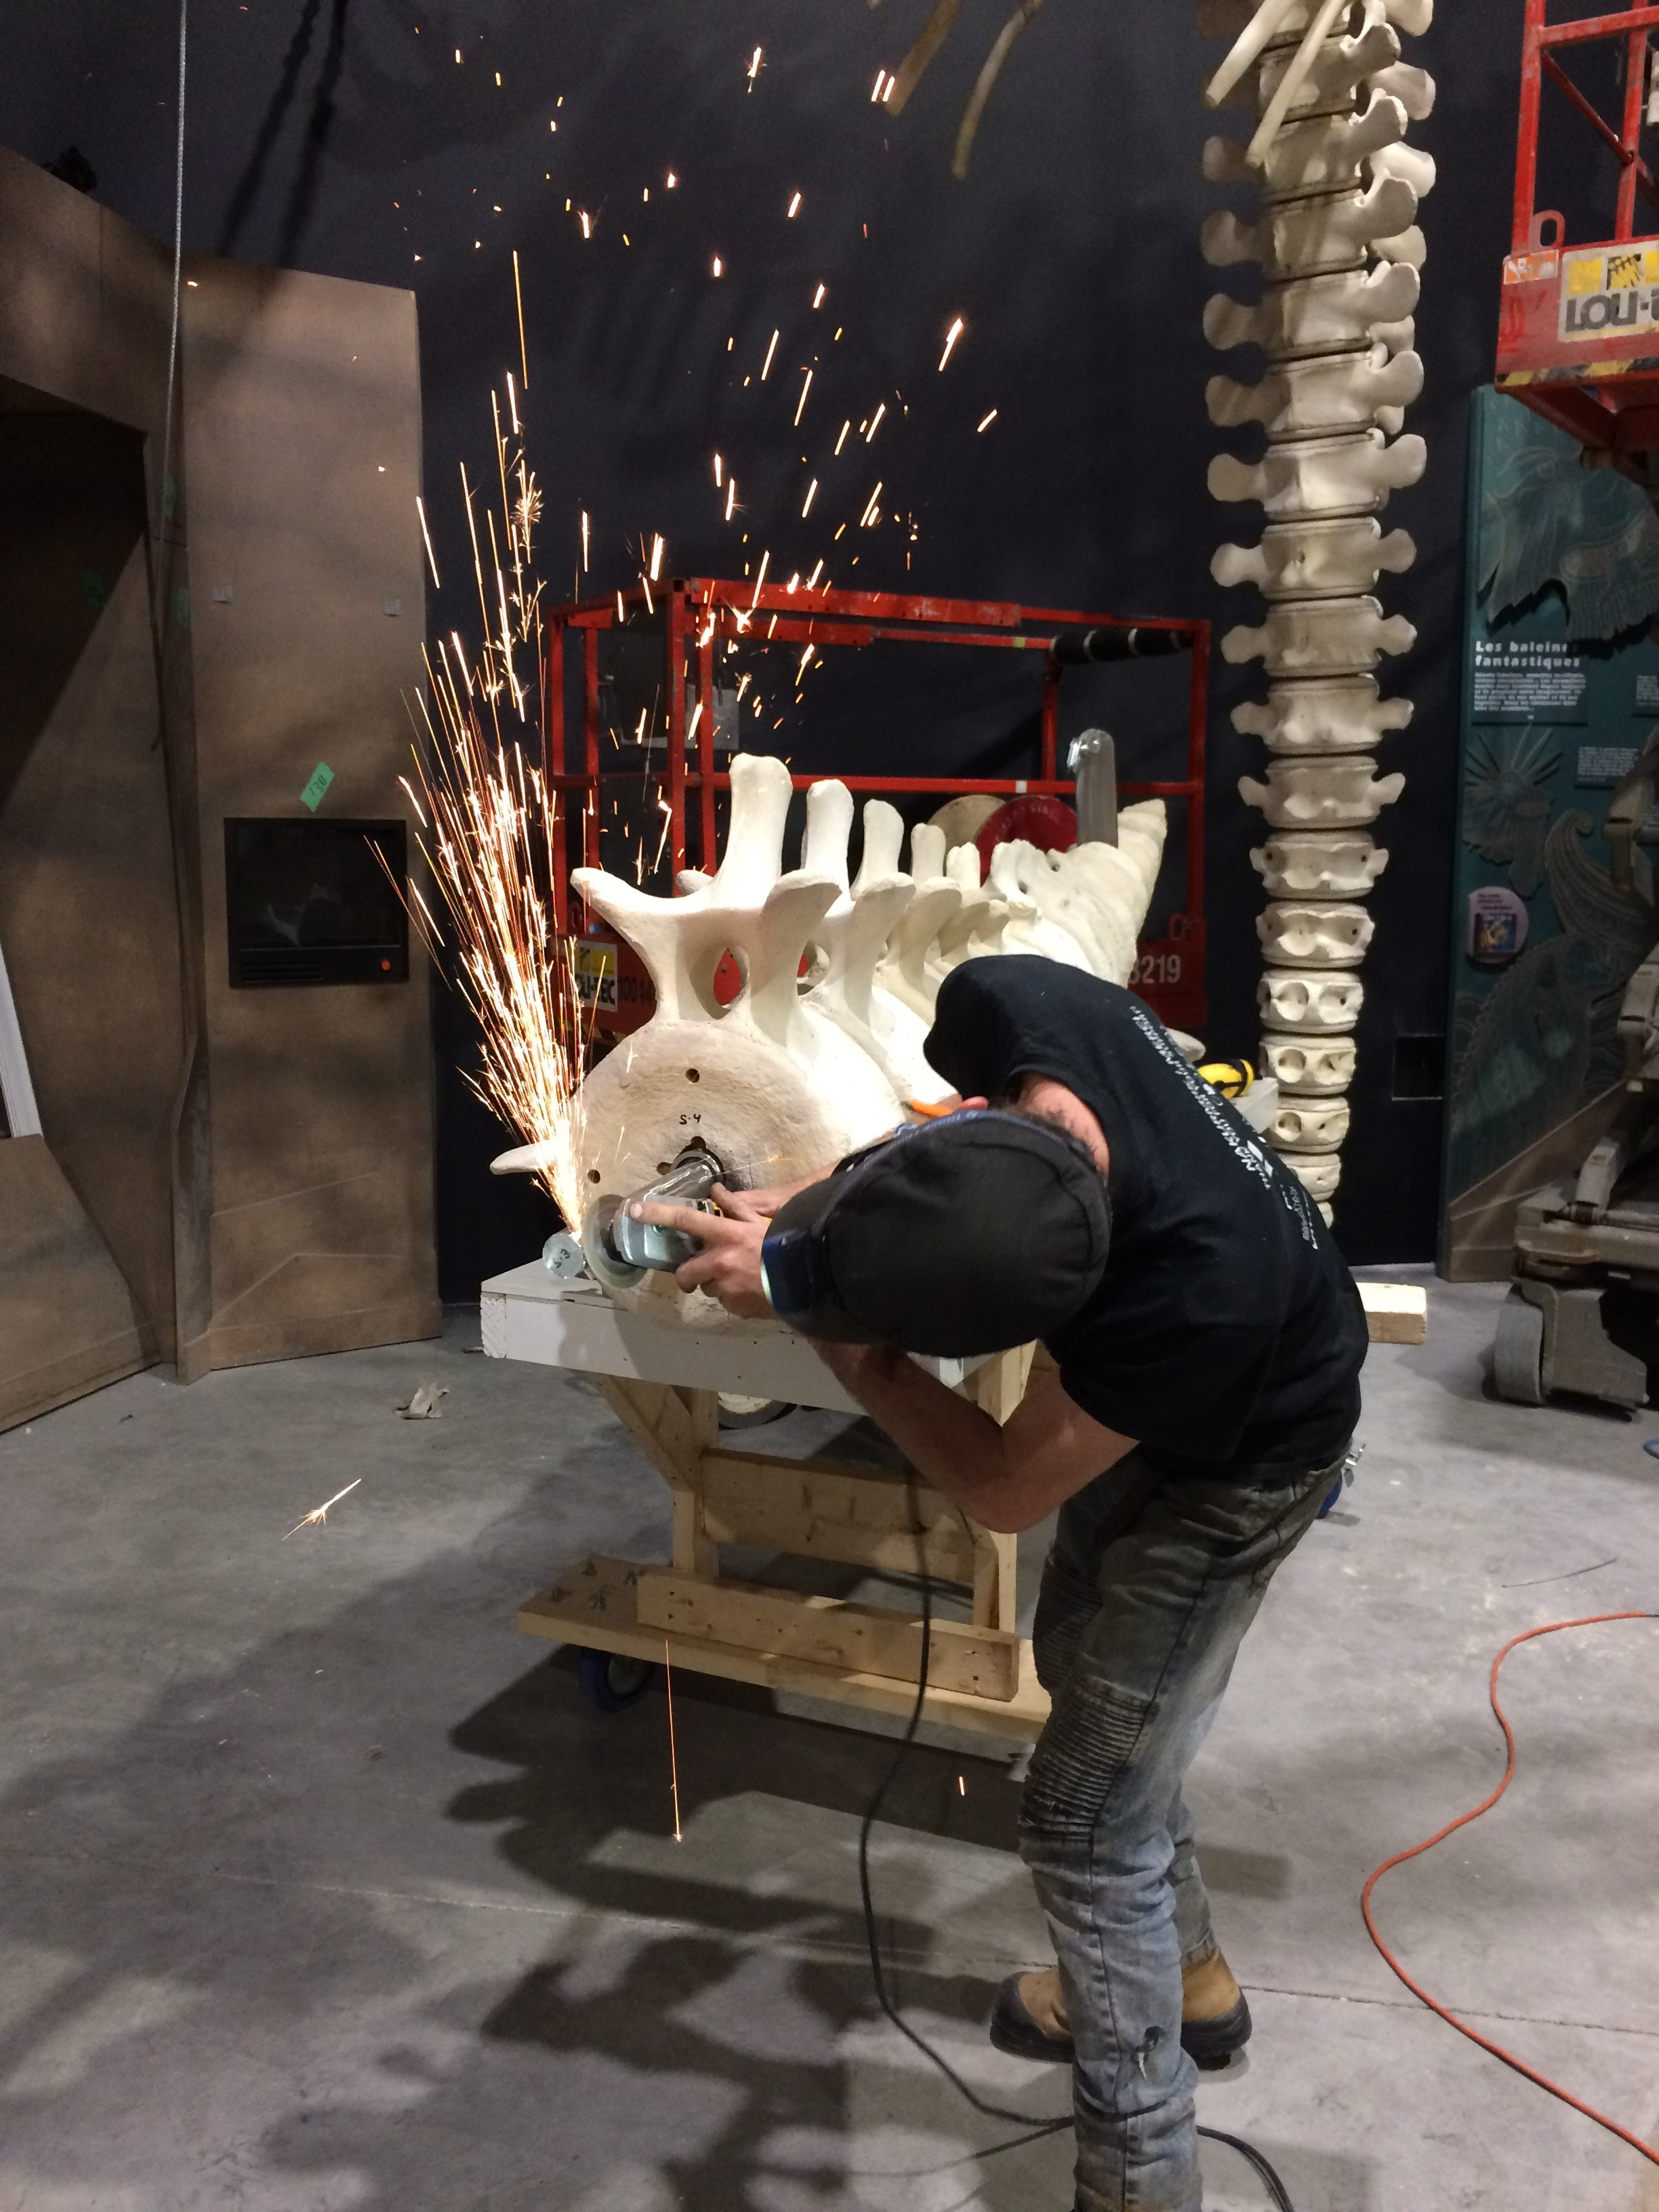 A technician welds a metal structure that will allow the whale to be positioned dynamically in the exhibition